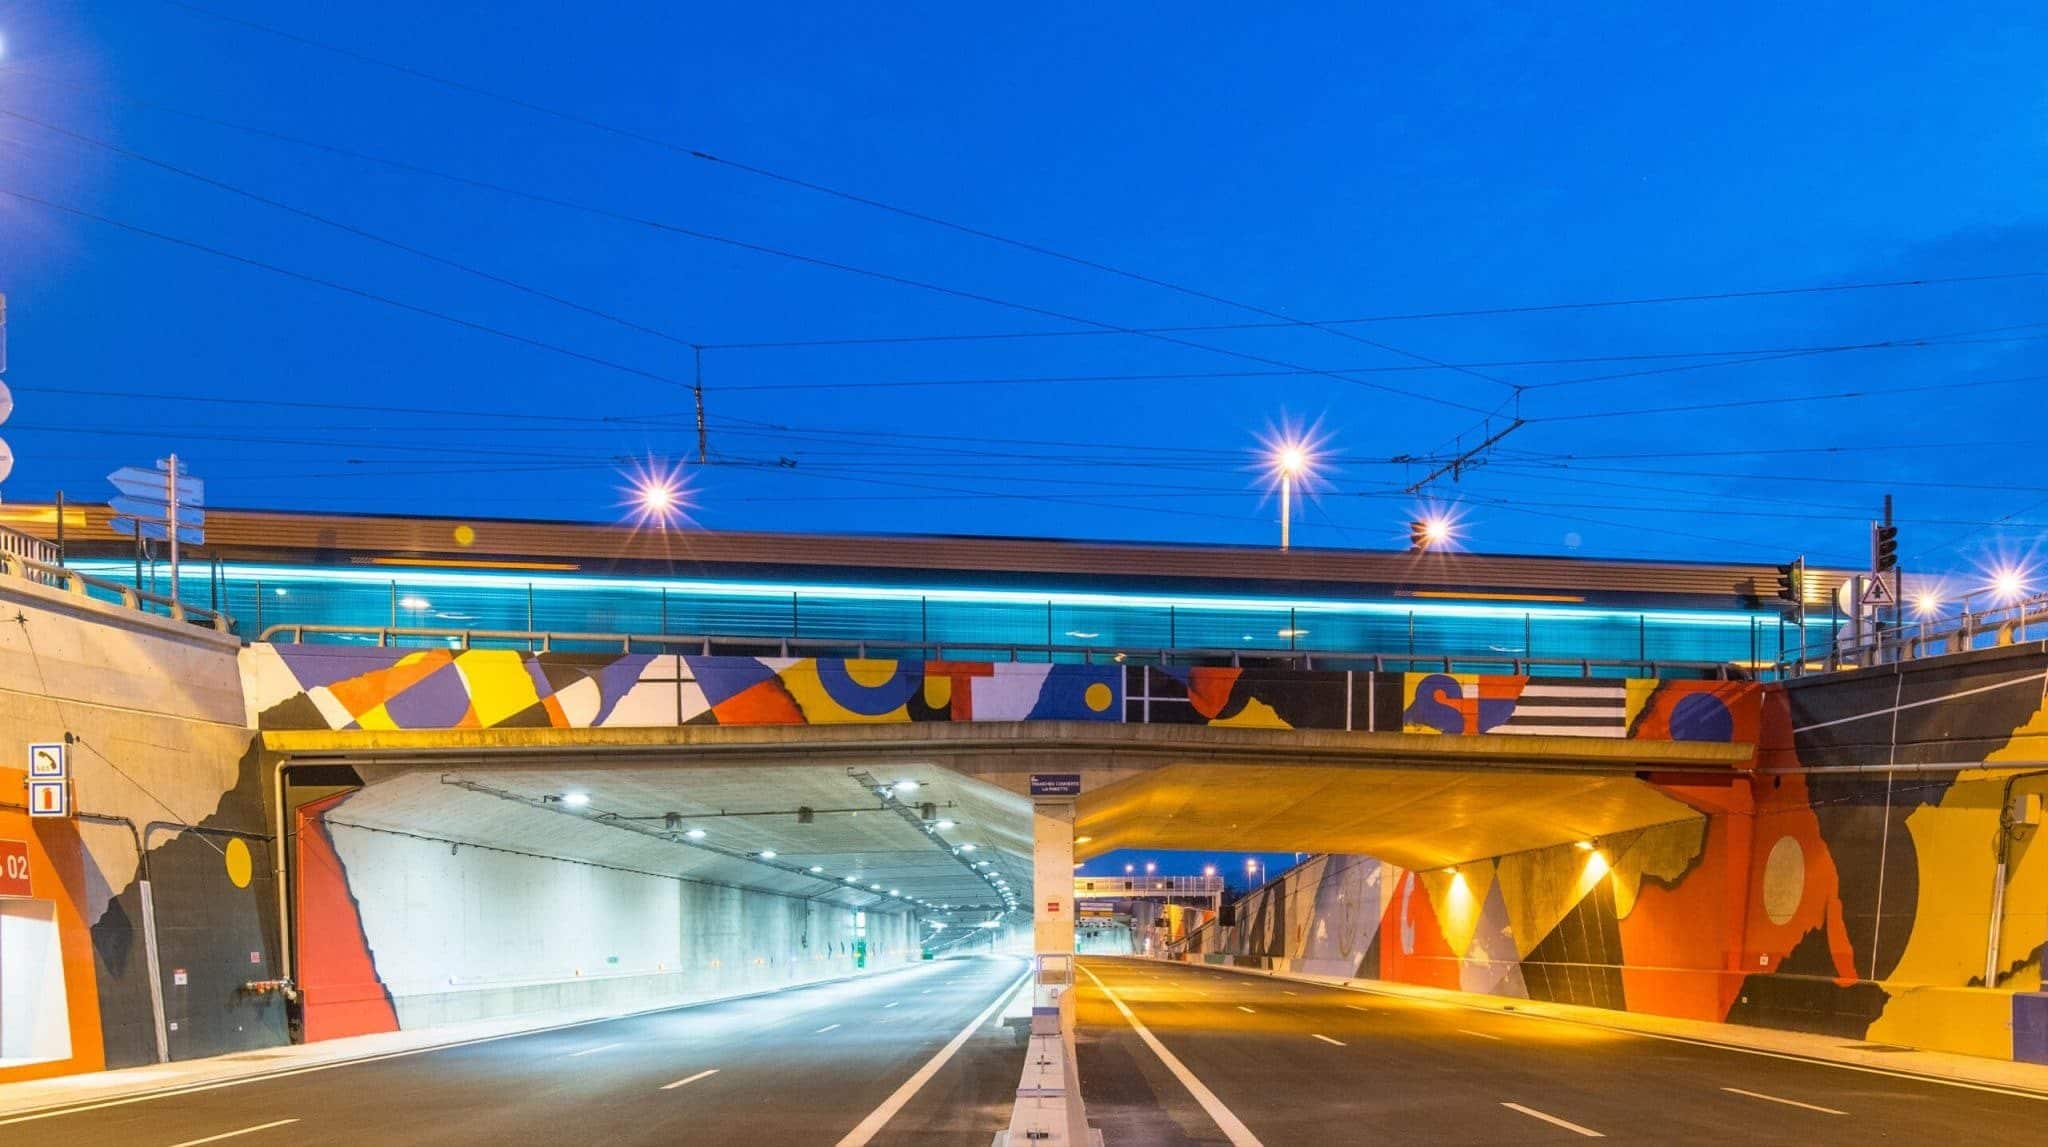 Wall murals on motorway underpass at night time